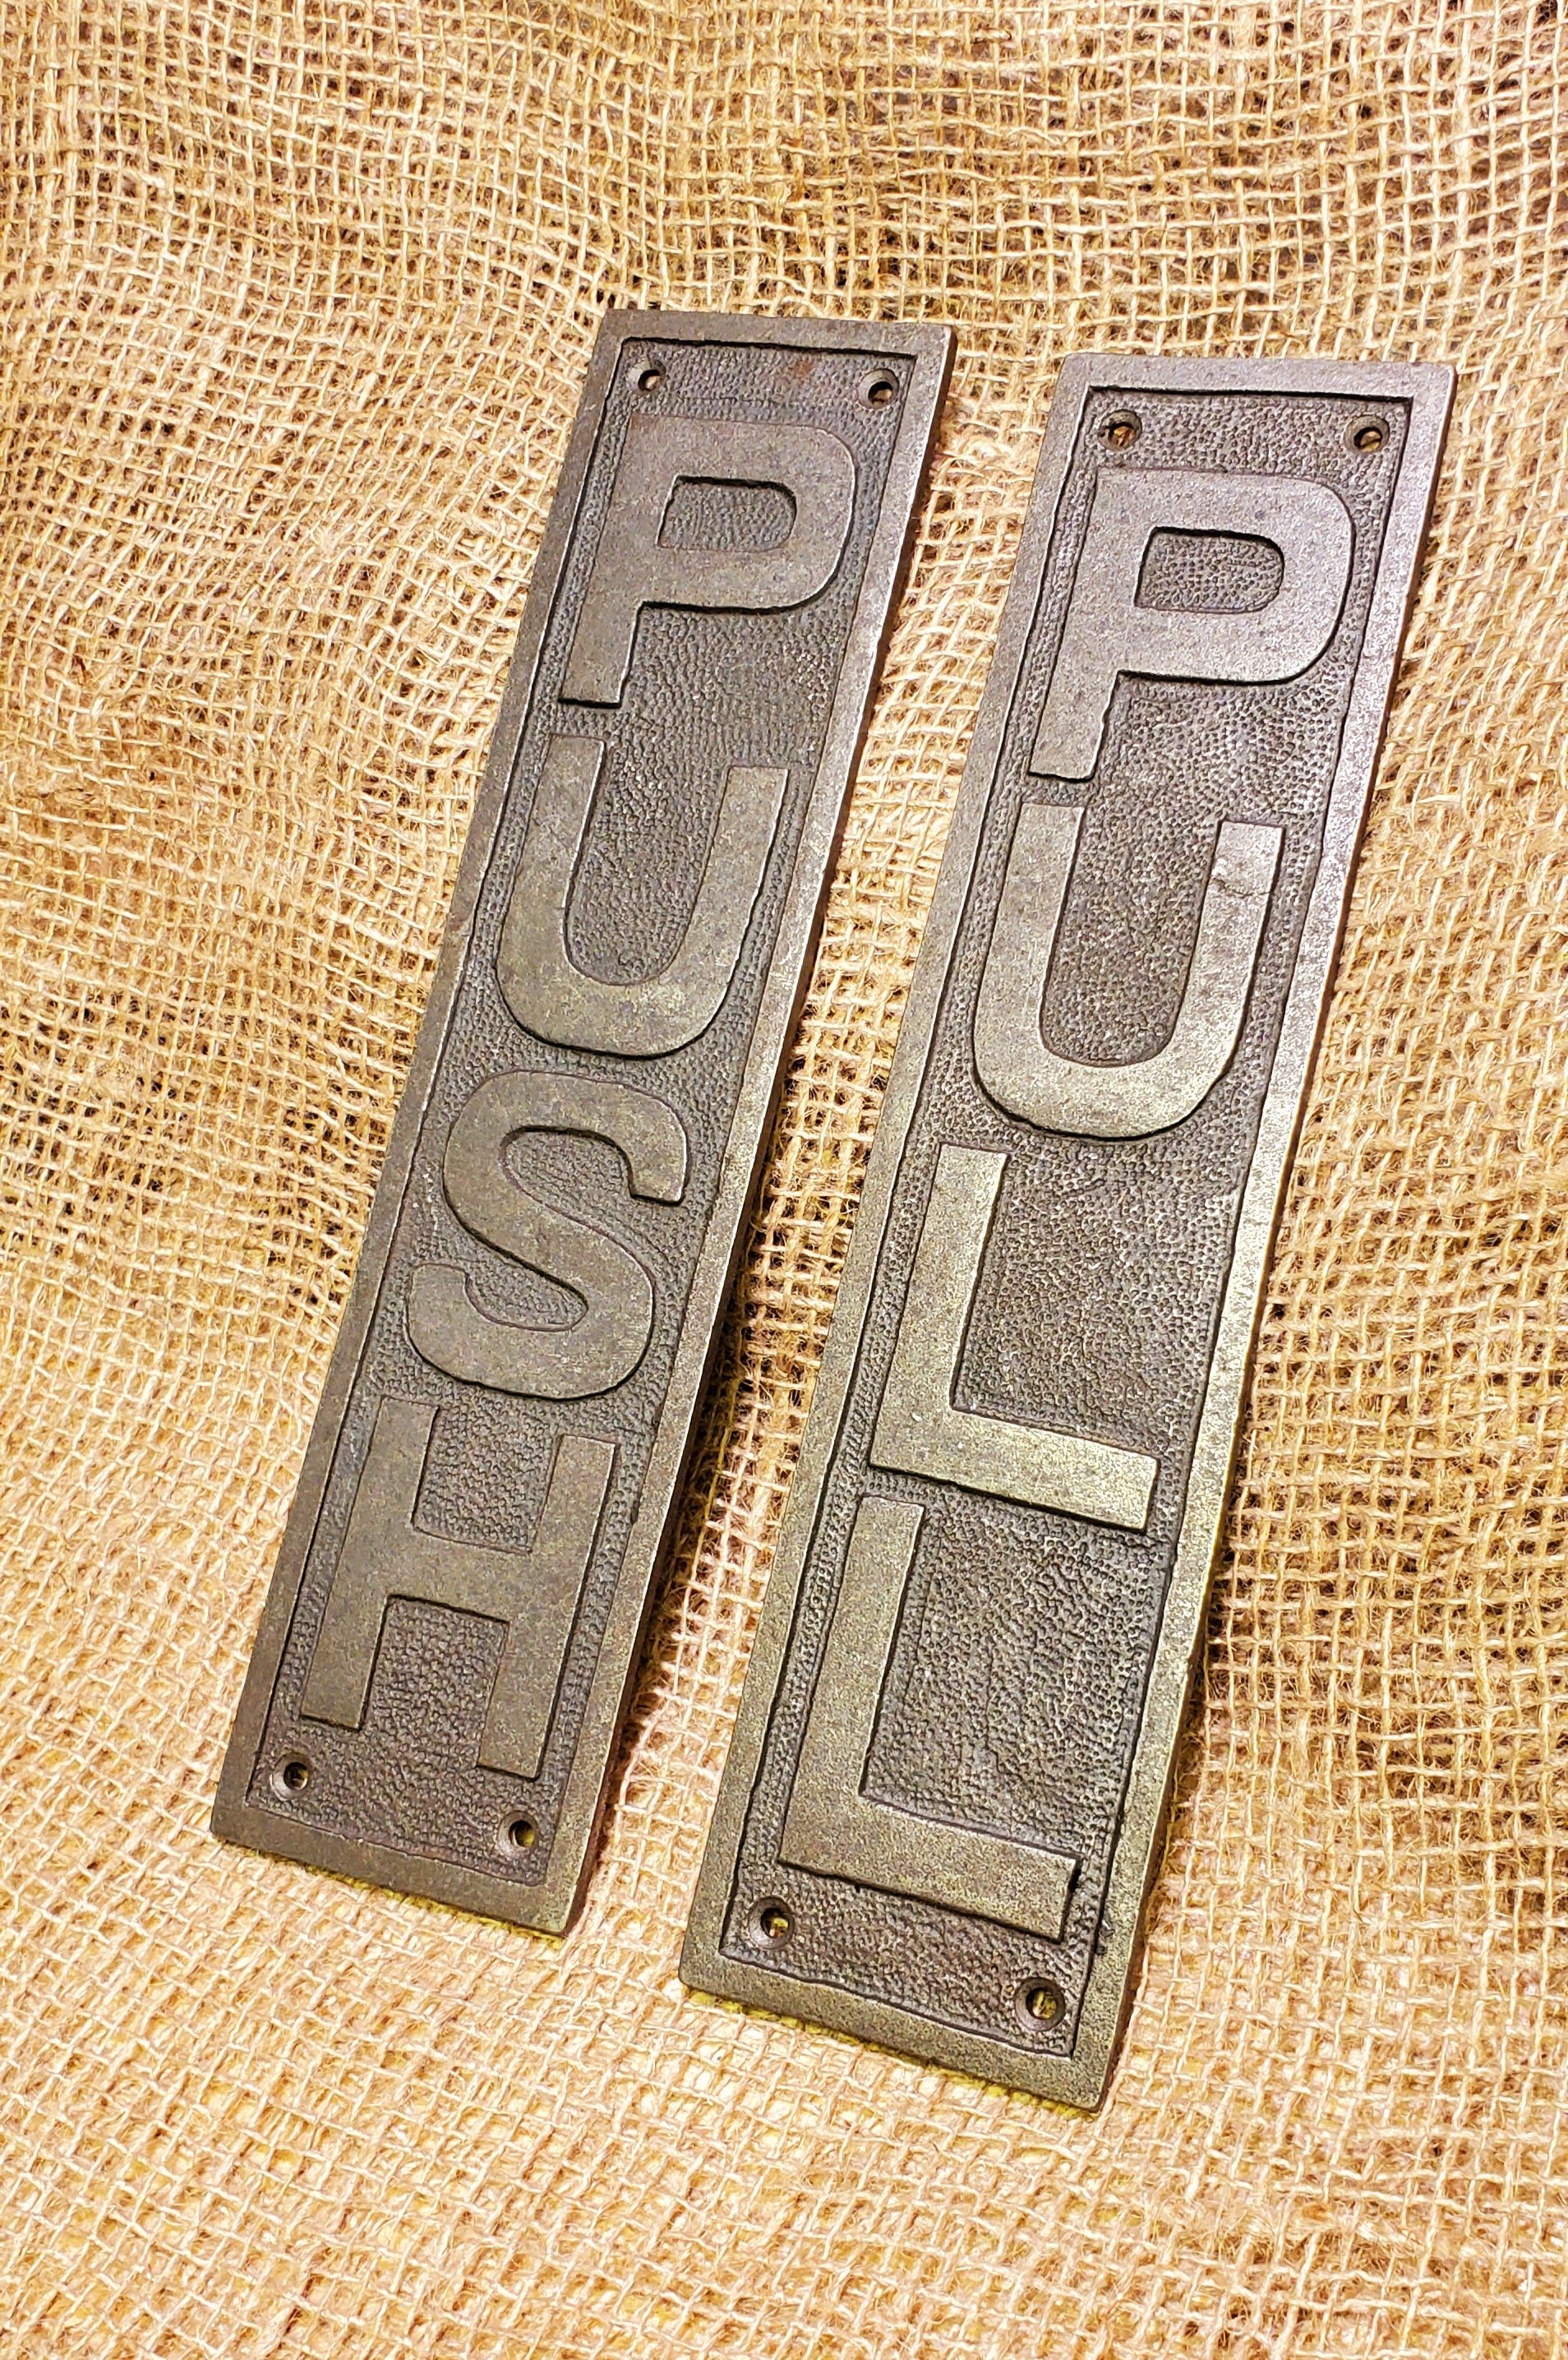 Door Push plate - PULL - Spearhead Collection - Door & Gate Entryway Hardware - Door and Entry Way Accessories, Door Hardware, Hardware, Millwork Hardware, Plaques and Signs, Push Plates